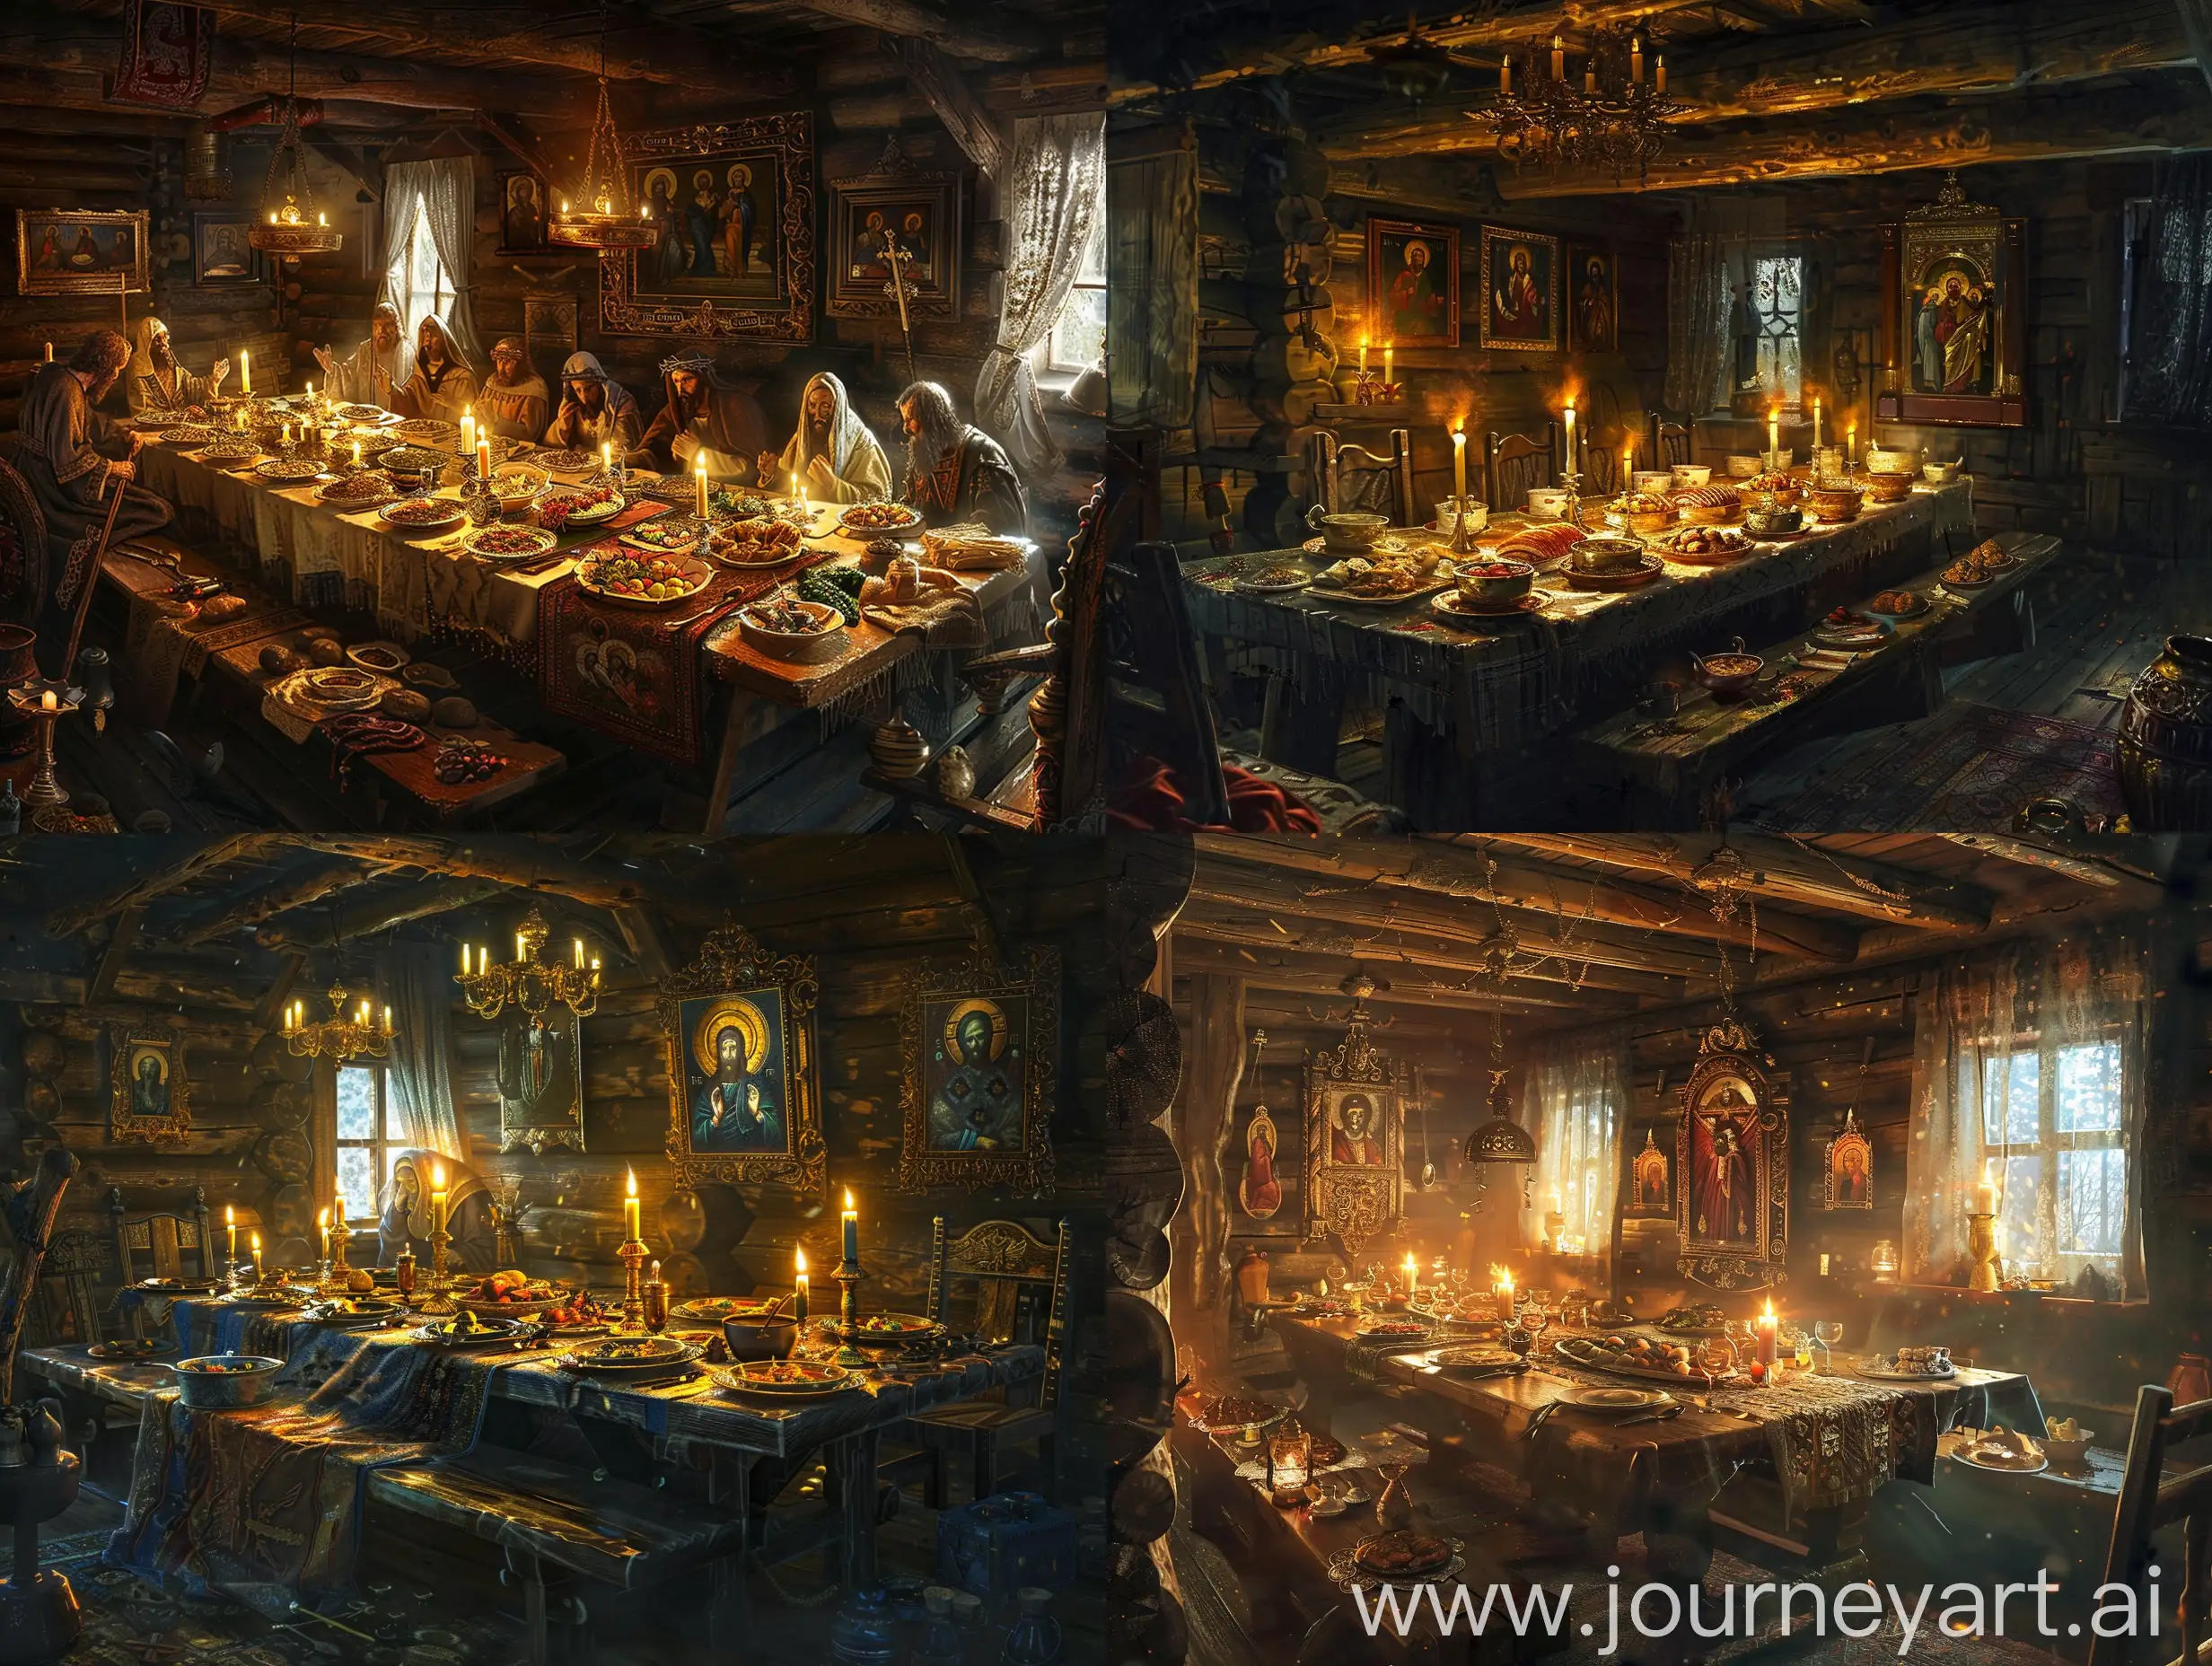 Medieval-Russian-Last-Supper-Traditional-Feast-in-Dimly-Lit-Cabin